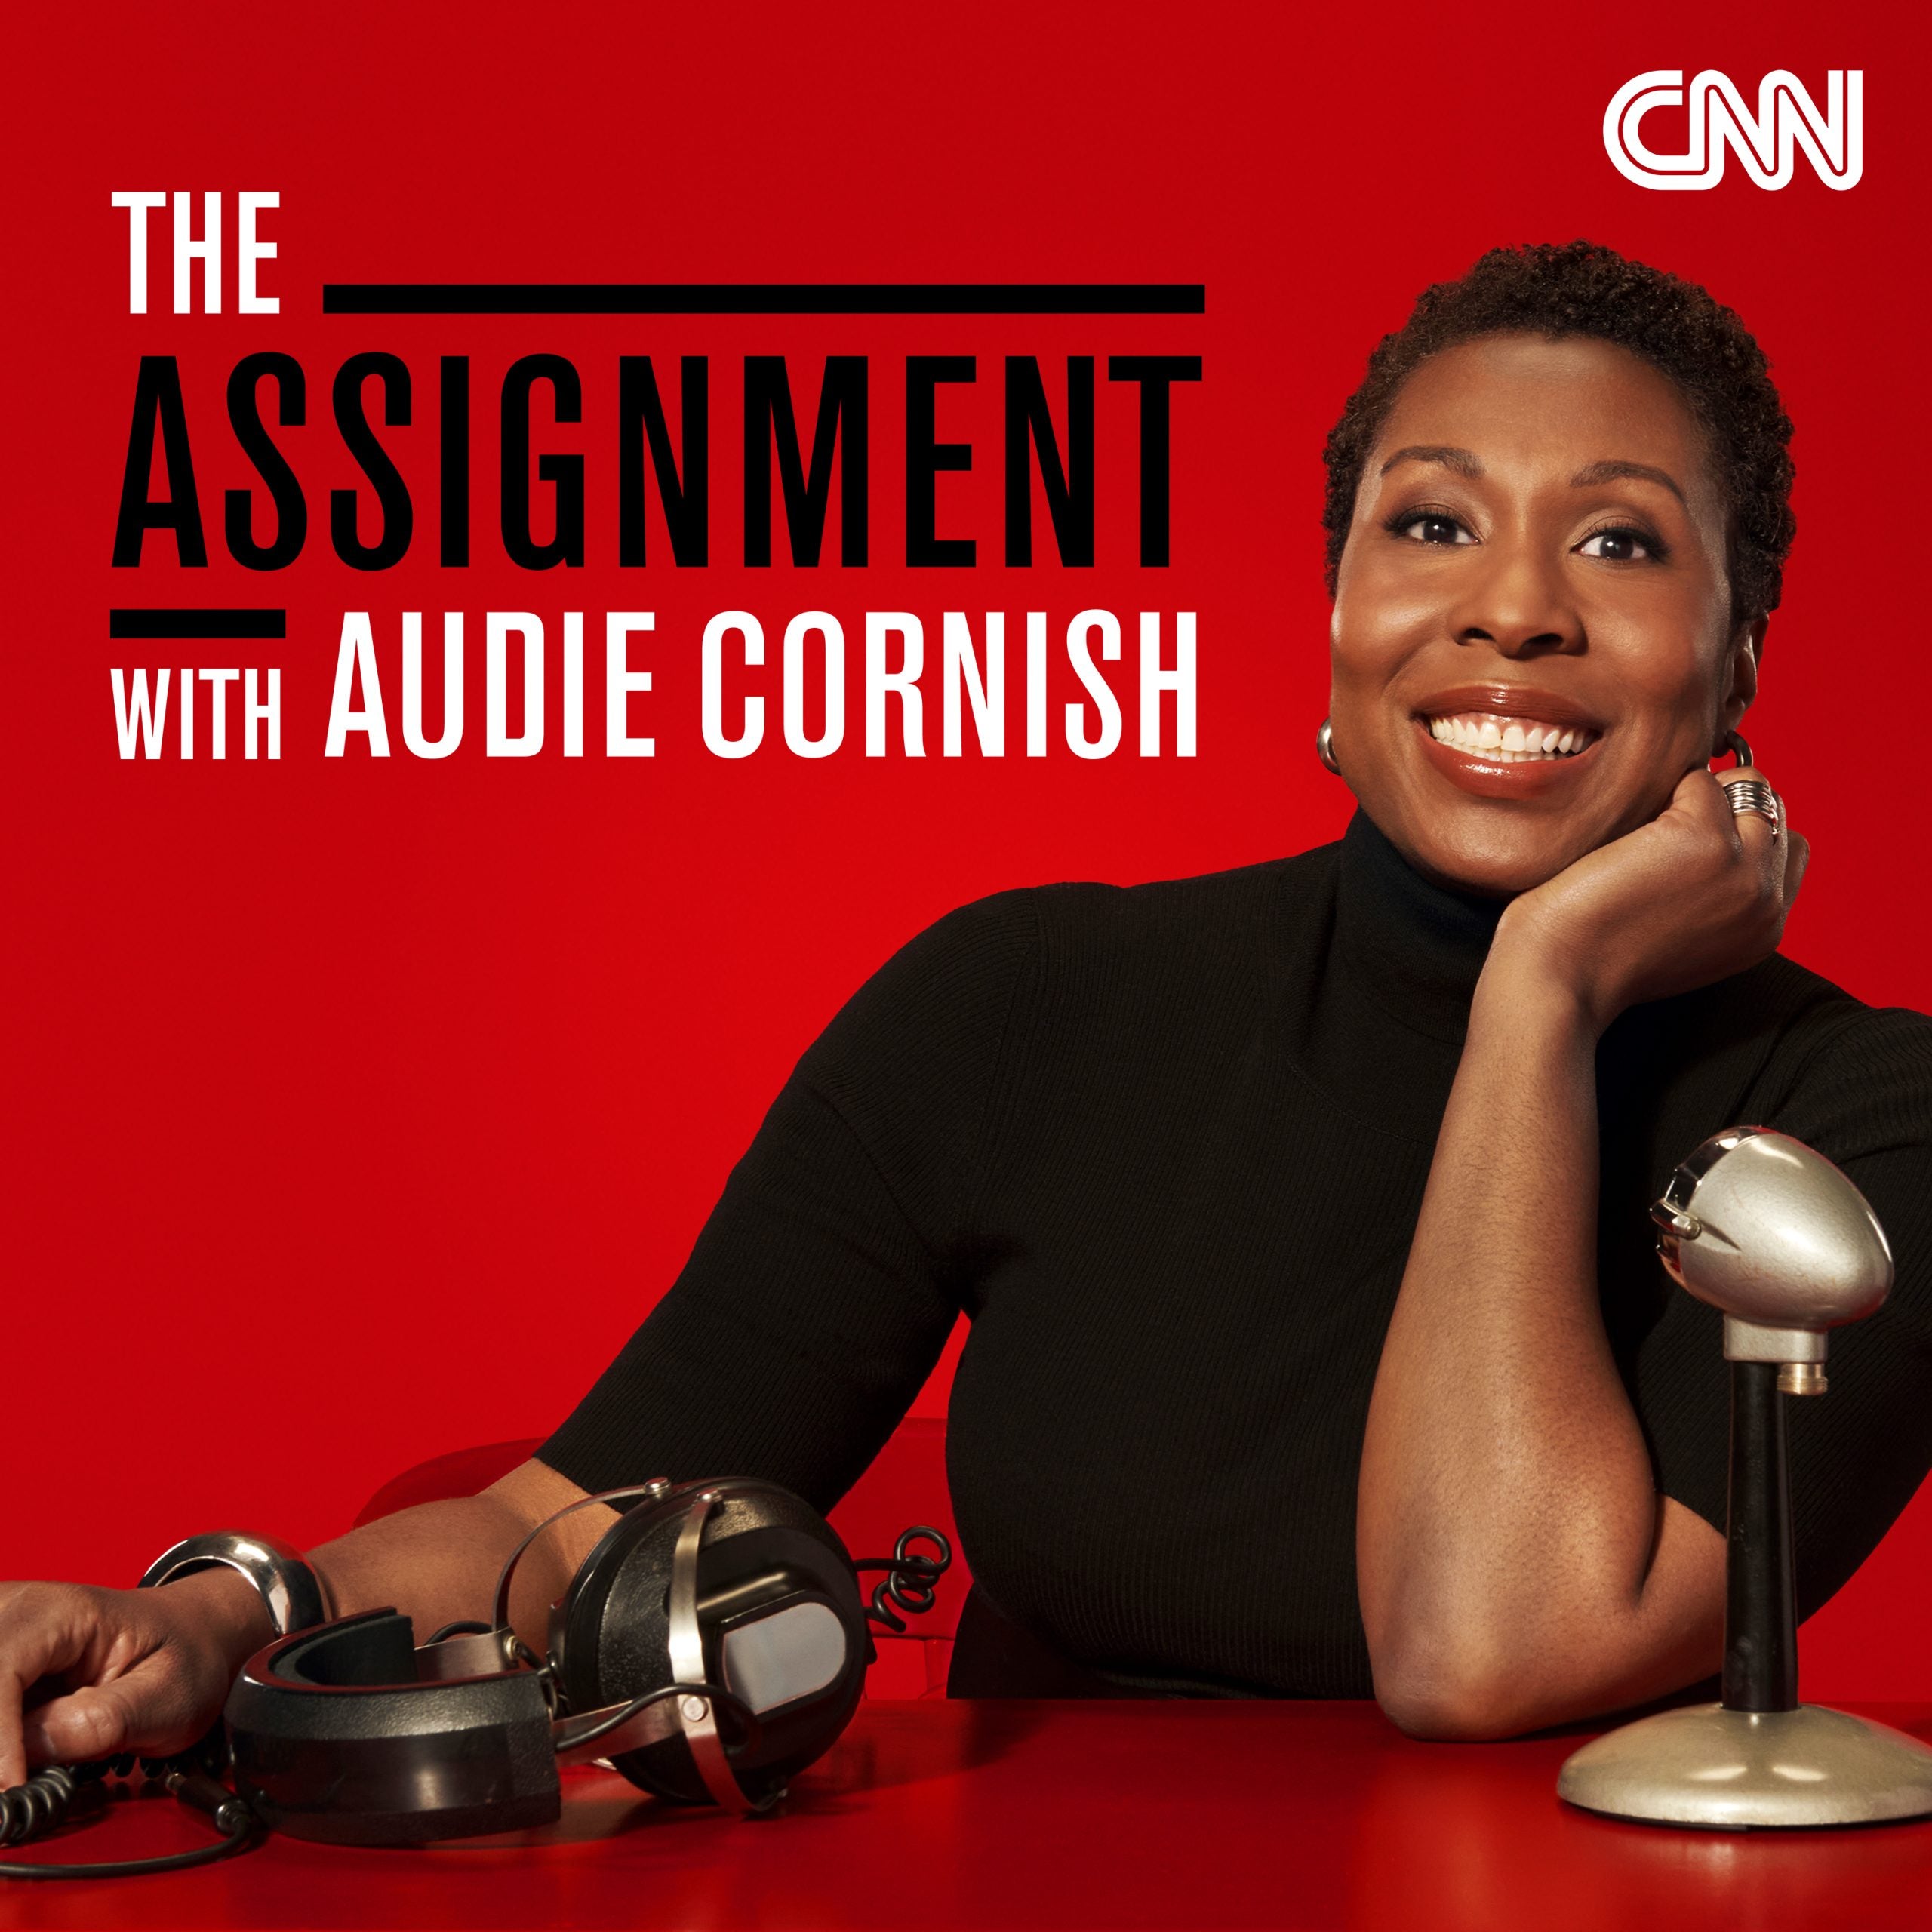 Audie Cornish Takes On ‘The Assignment’ With New Podcast On CNN Audio